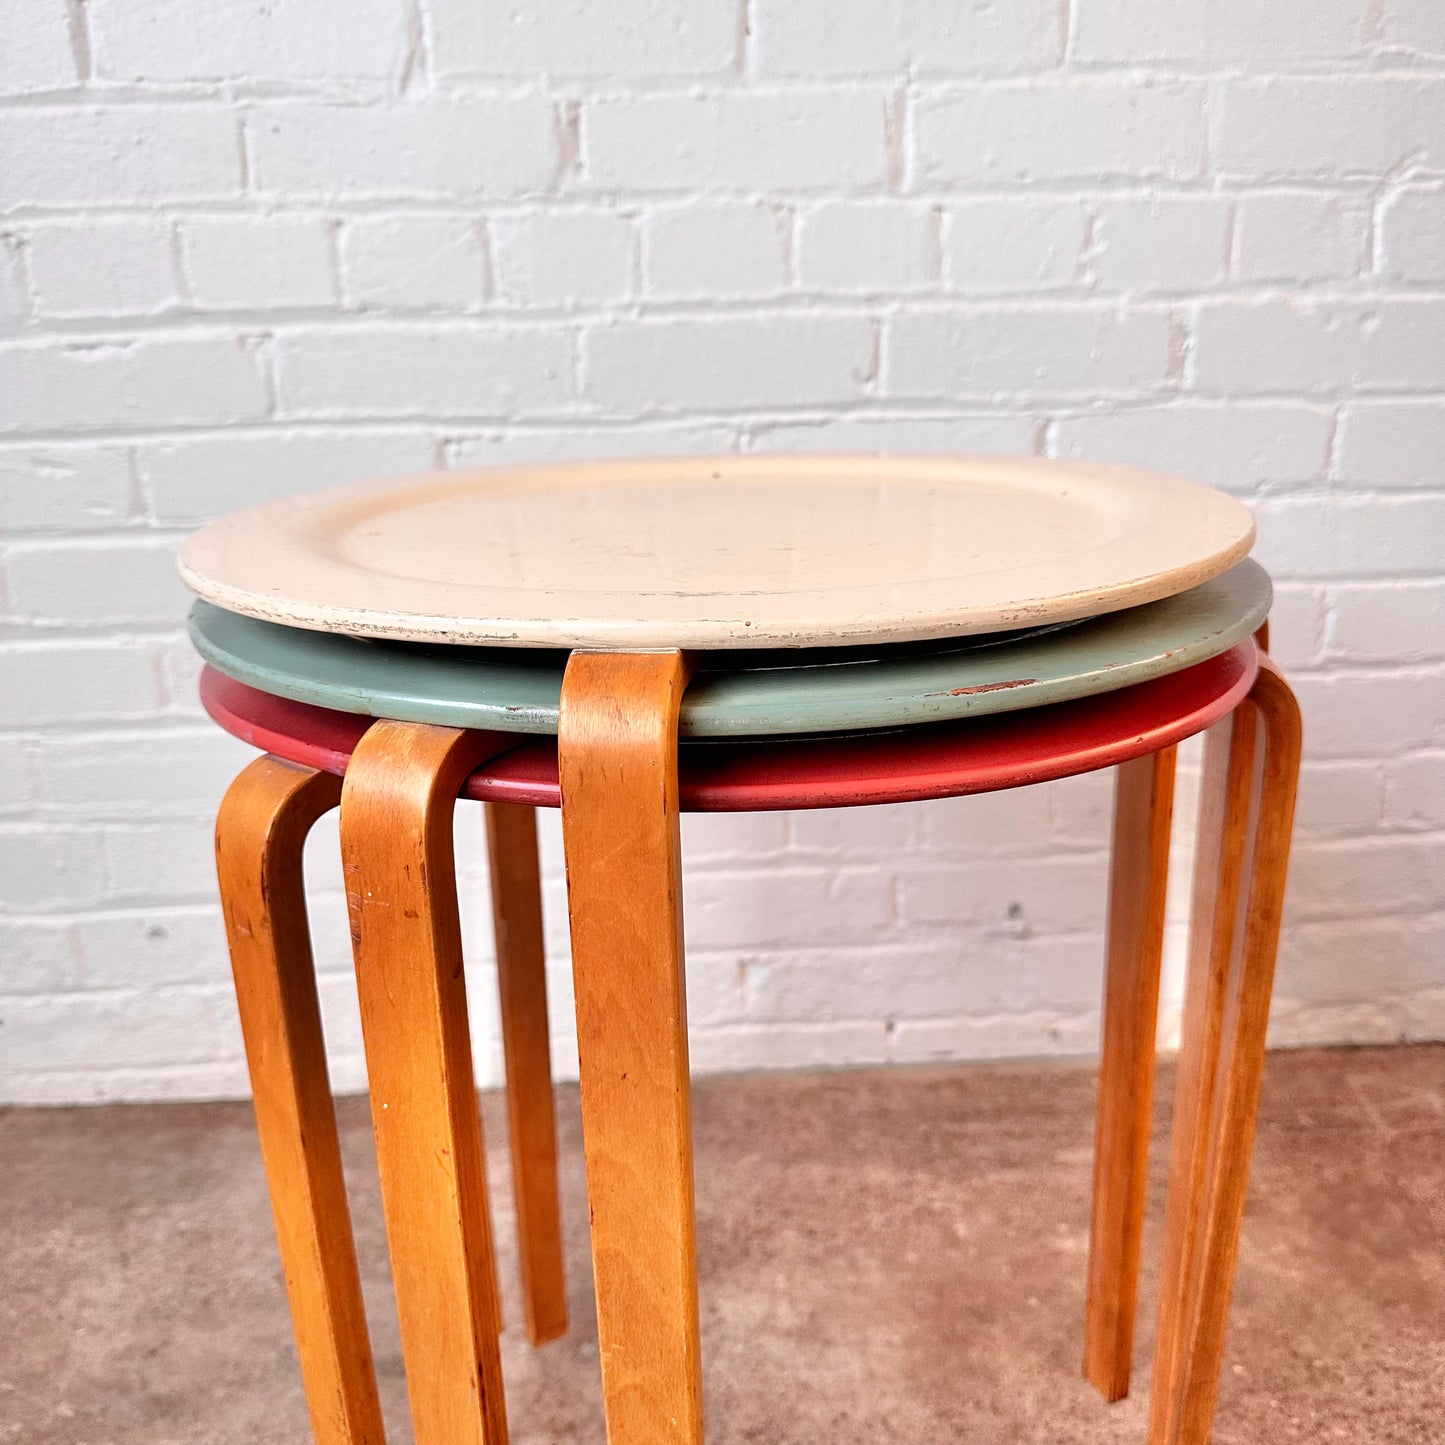 SET OF 3 ROUND STACKING TABLES BODAFORS, SWEDEN C. 1950S